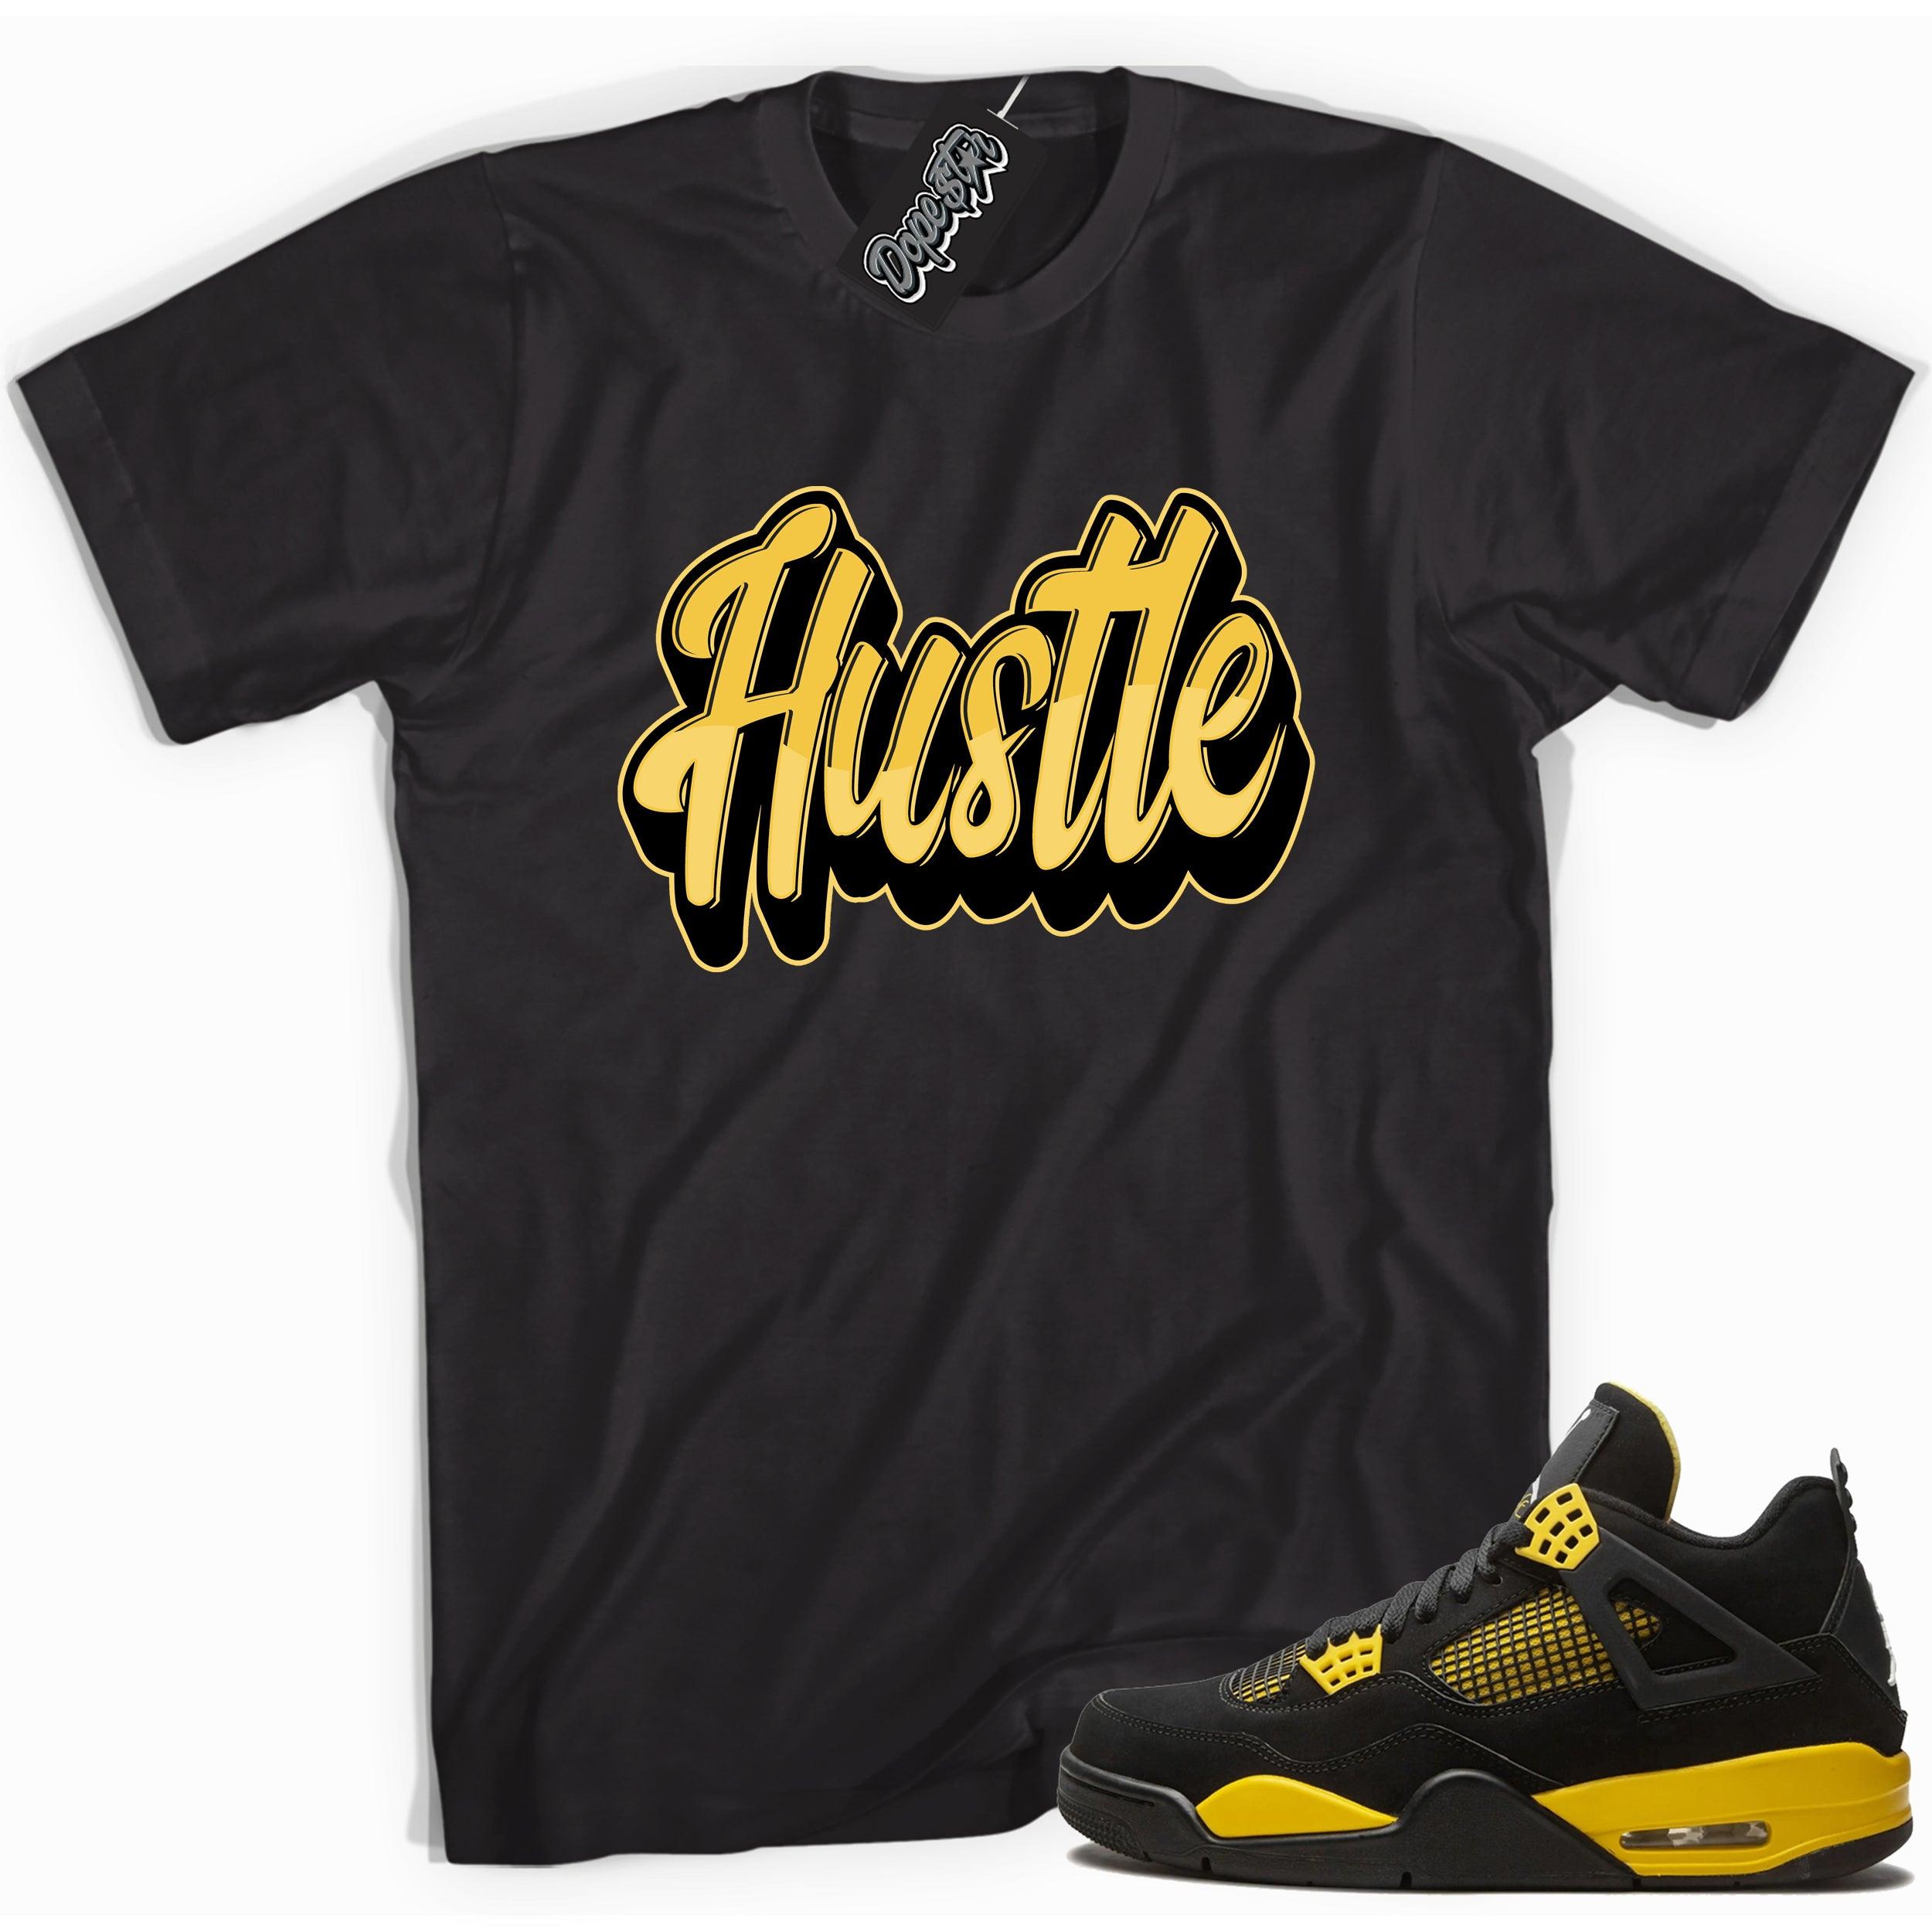 Cool black graphic tee with 'hustle' print, that perfectly matches  Air Jordan 4 Thunder sneakers